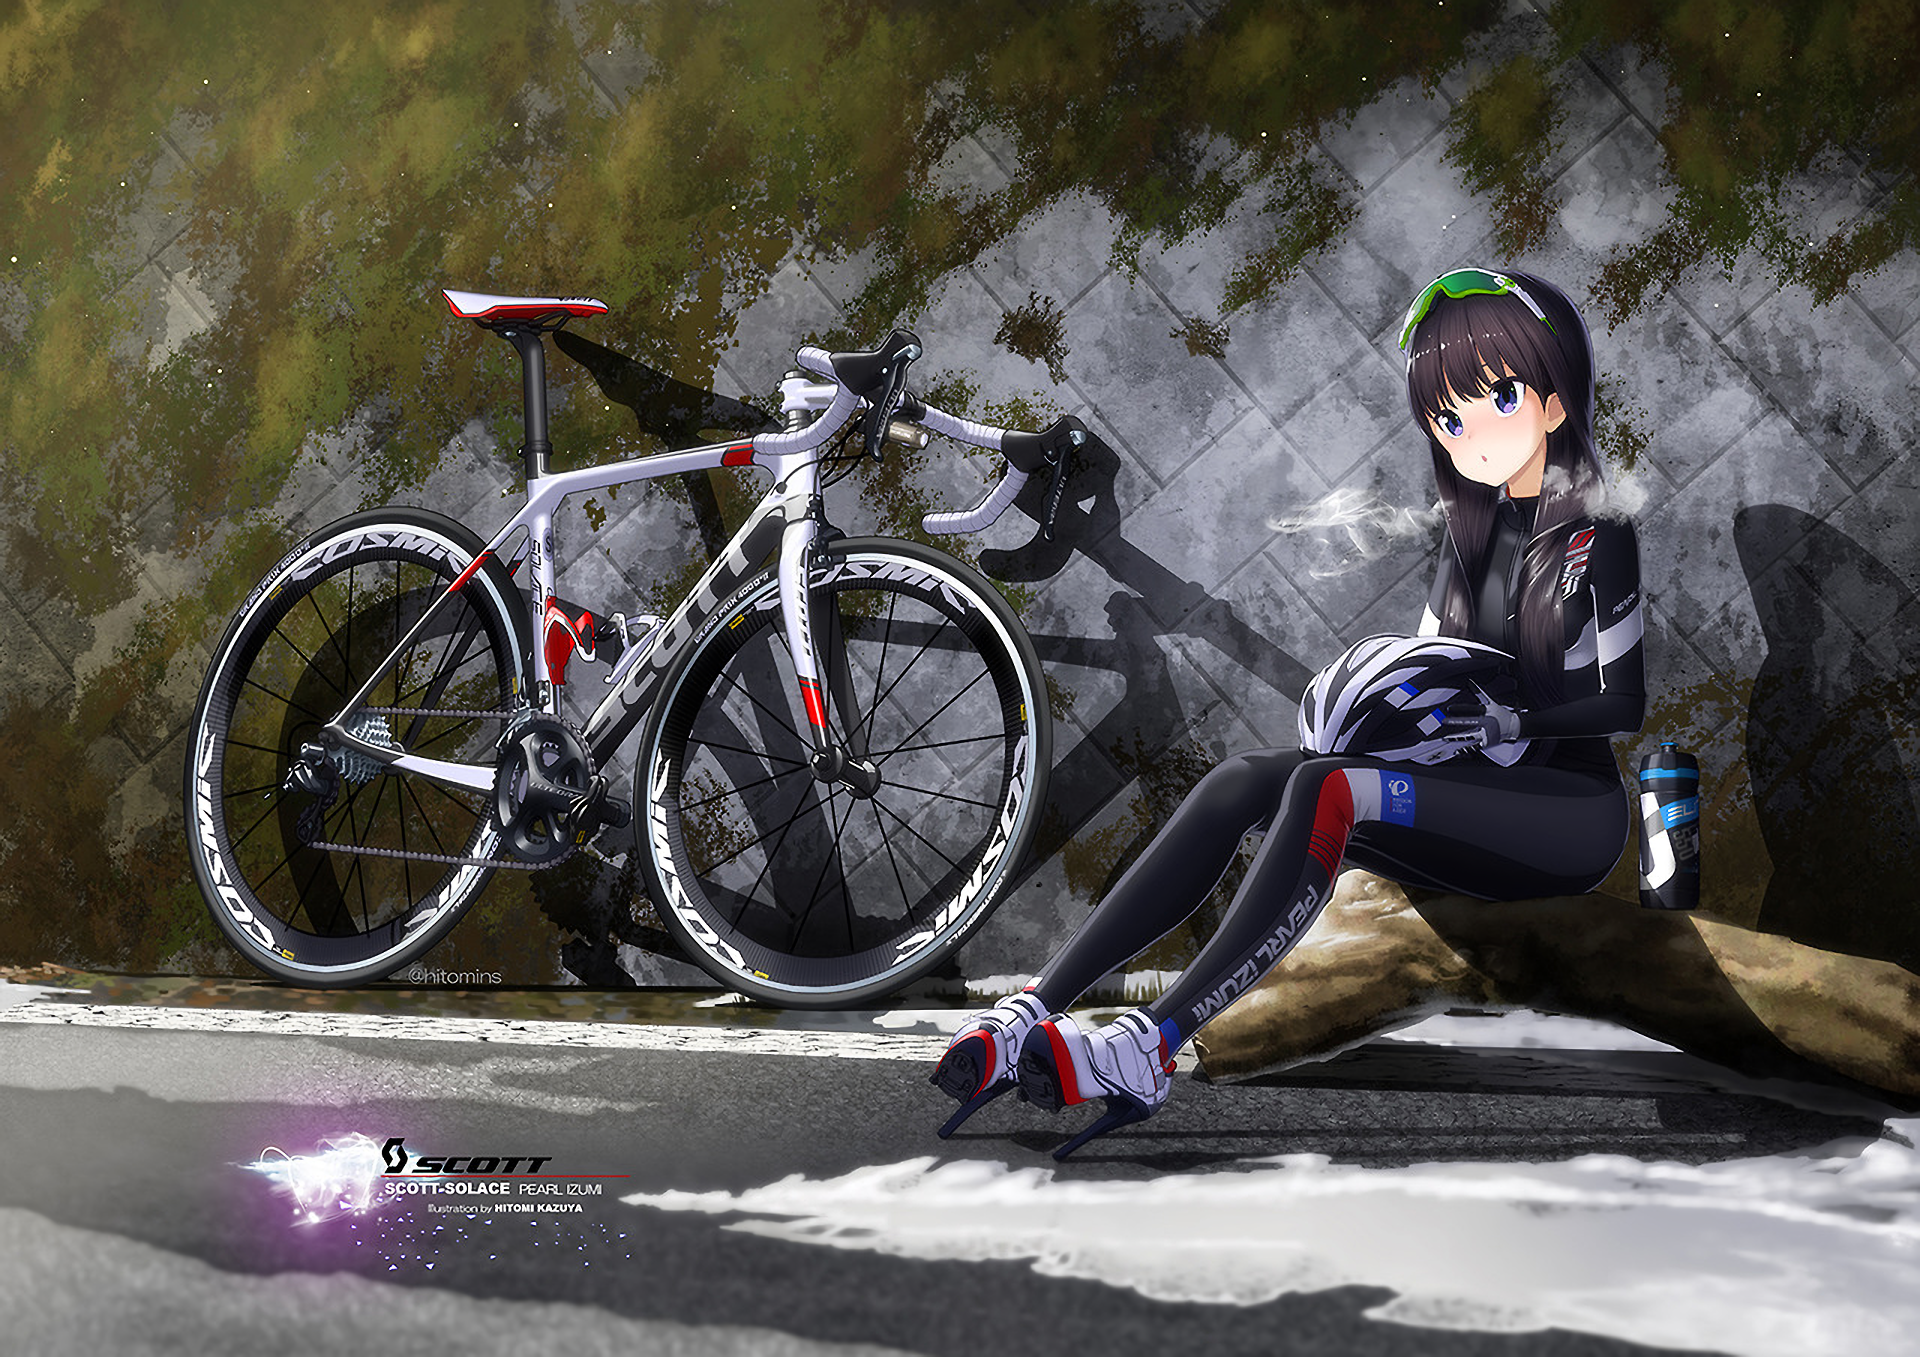 Video: Short history of cycling anime | Road Bike, Cycling Forums